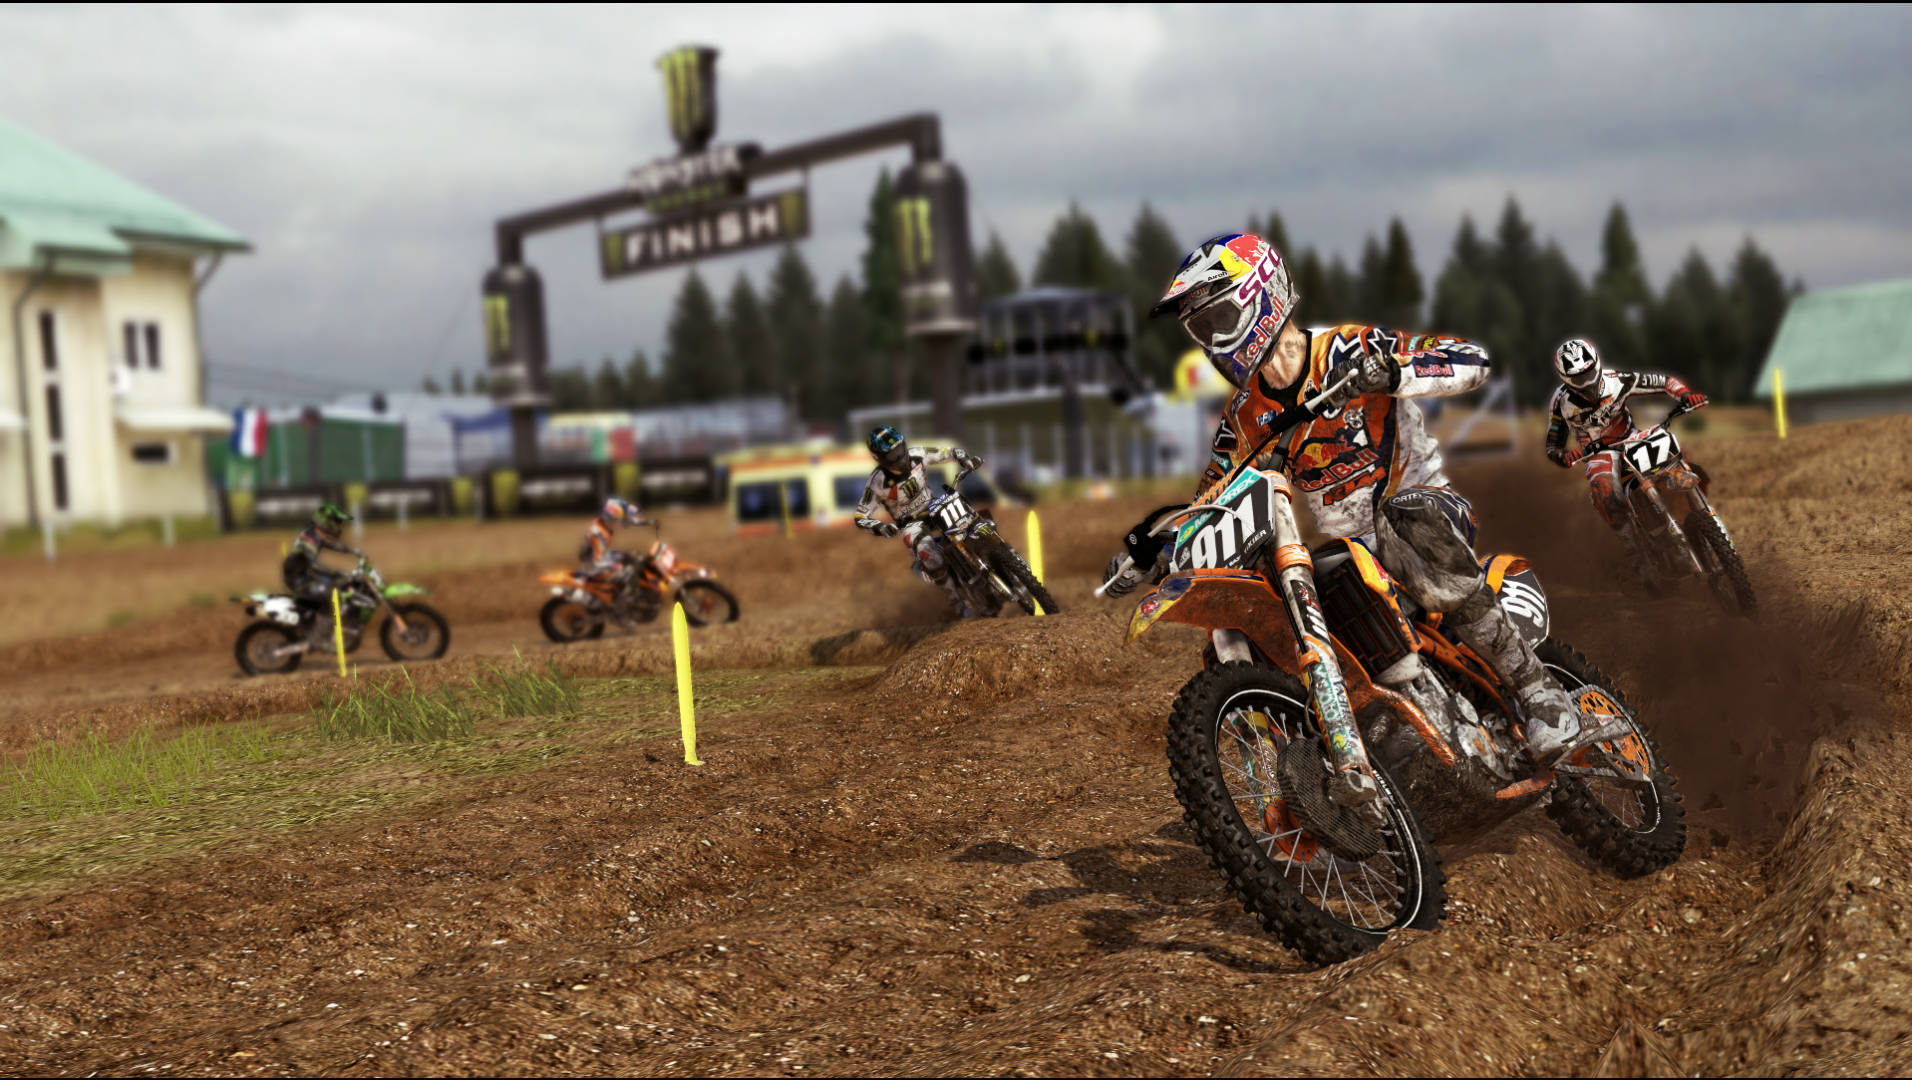 Download MXGP - The Official Motocross Videogame Full PC Game